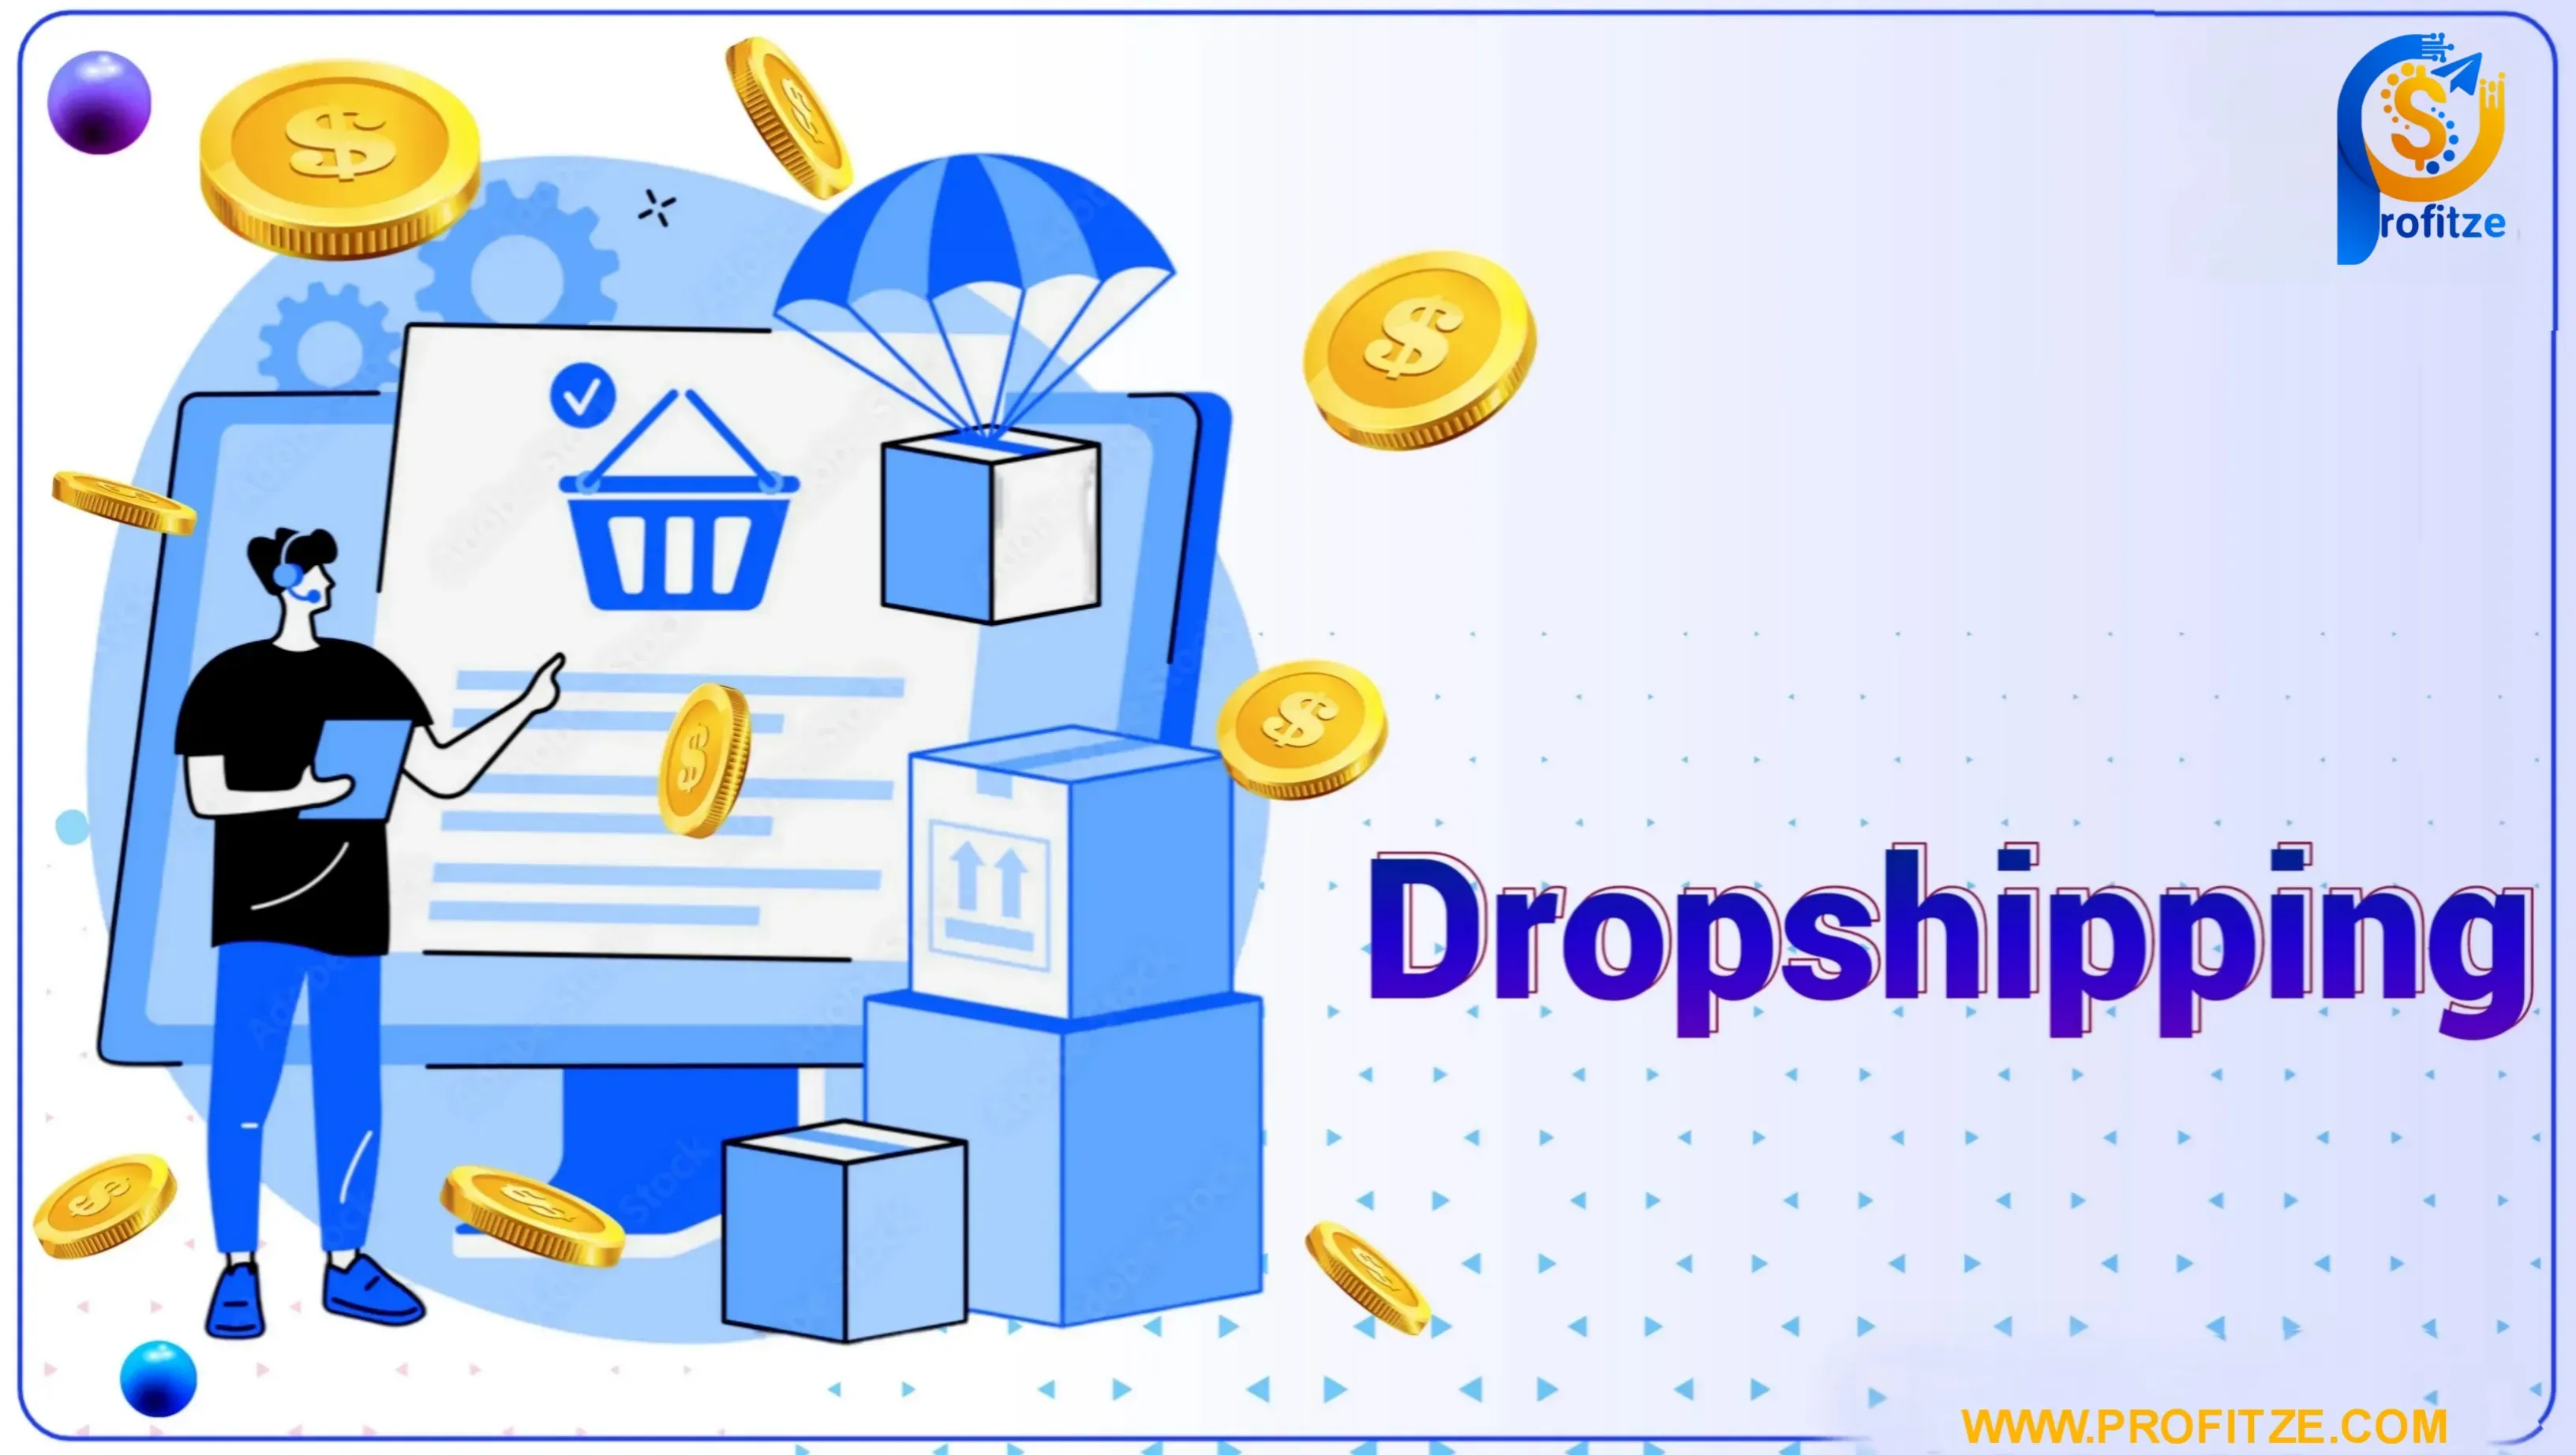 Profit from dropshipping